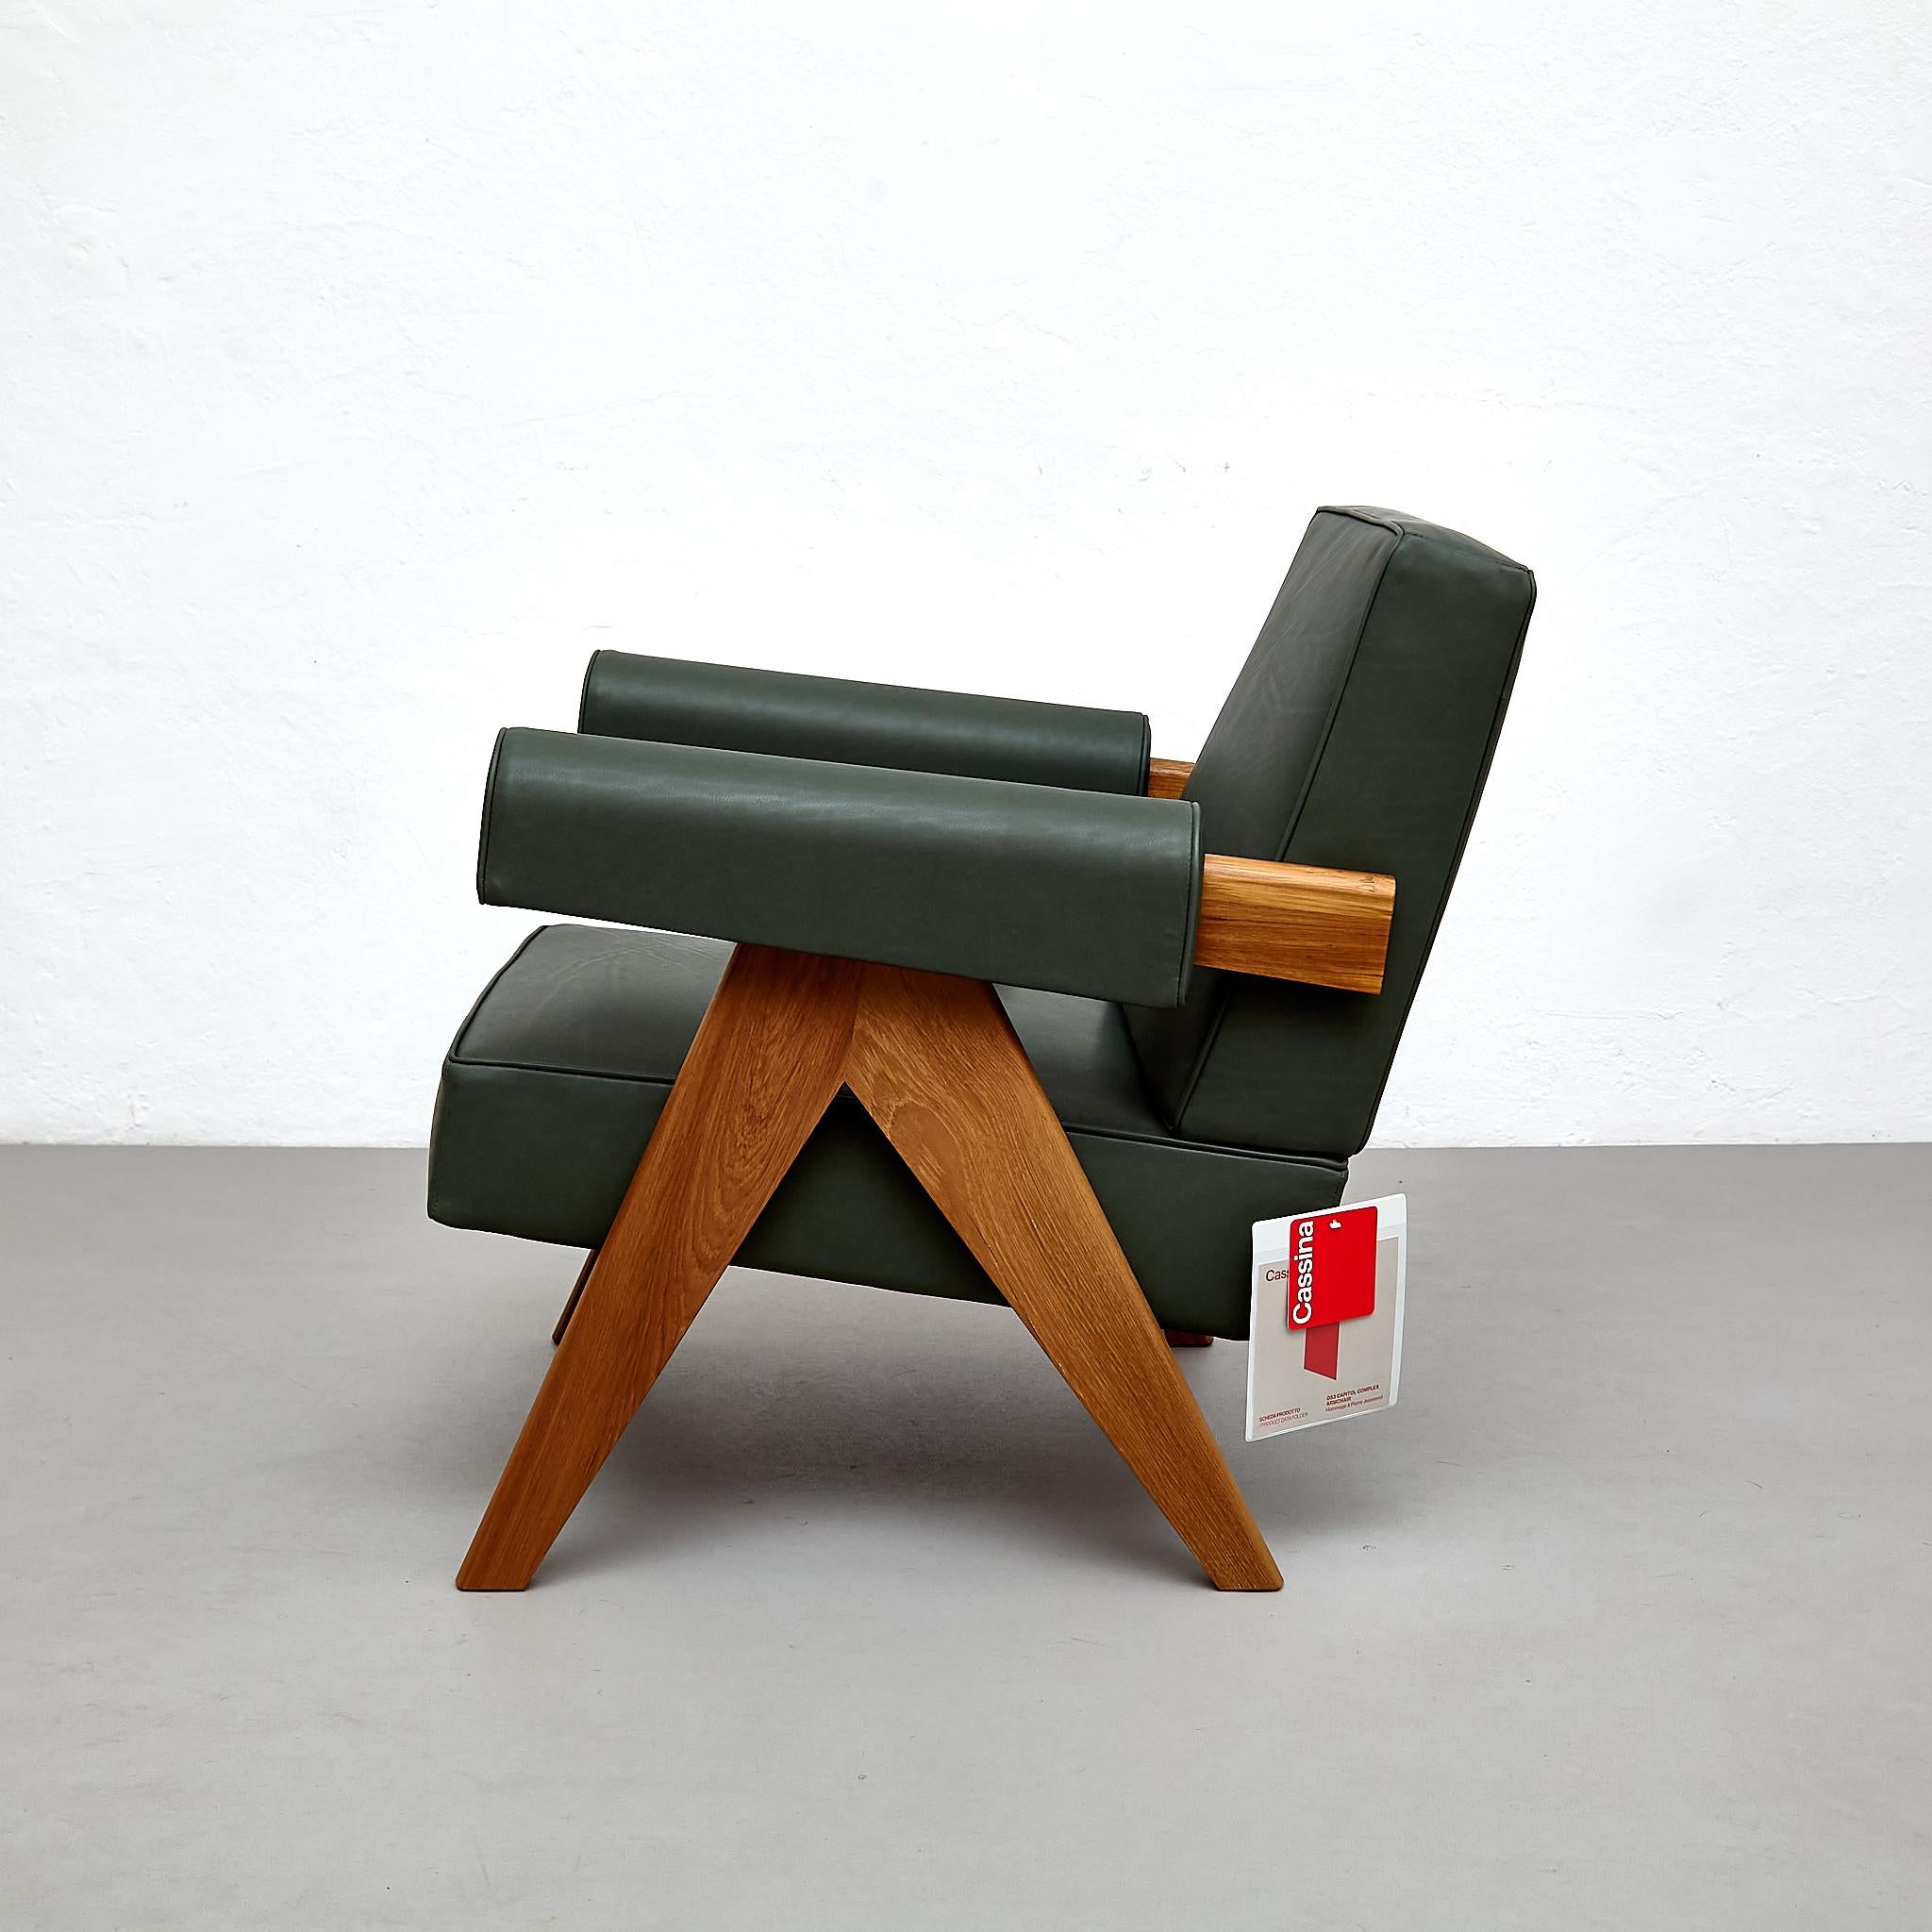 Pierre Jeanneret 053 Capitol Complex Teak Wood Green Leather Armchair by Cassina In New Condition For Sale In Barcelona, Barcelona